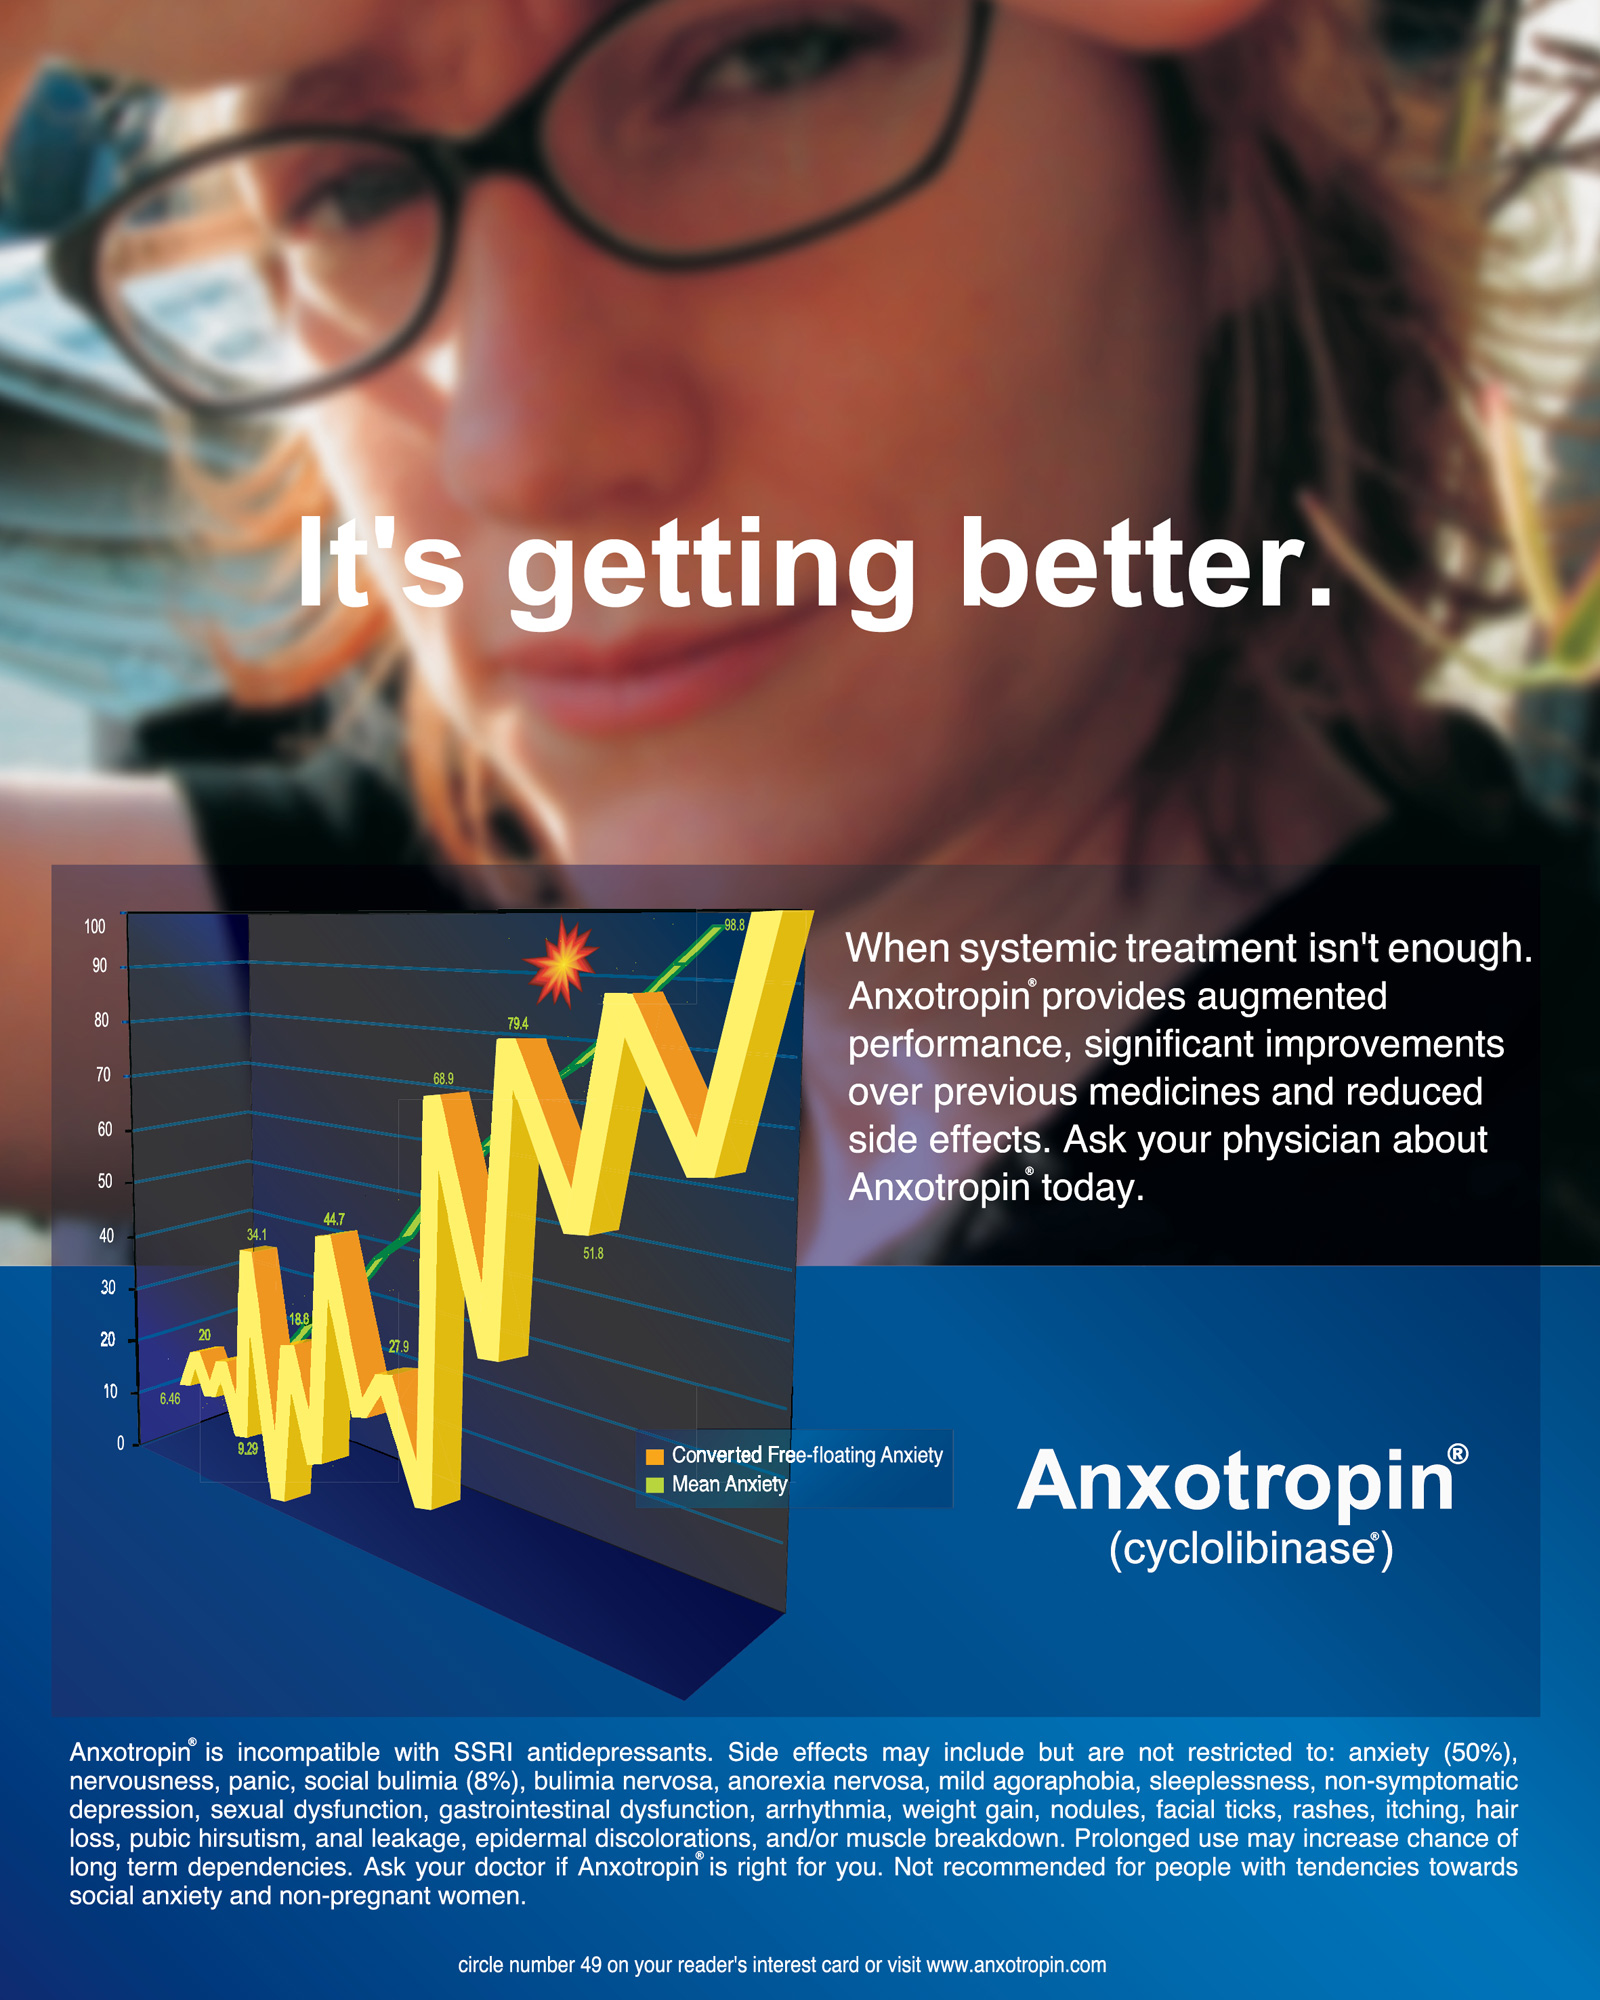 A pharmaceutical advertisement for Anxotropin, a mysterious drug for treating anxiety whose primary side effect is anxiety itself.